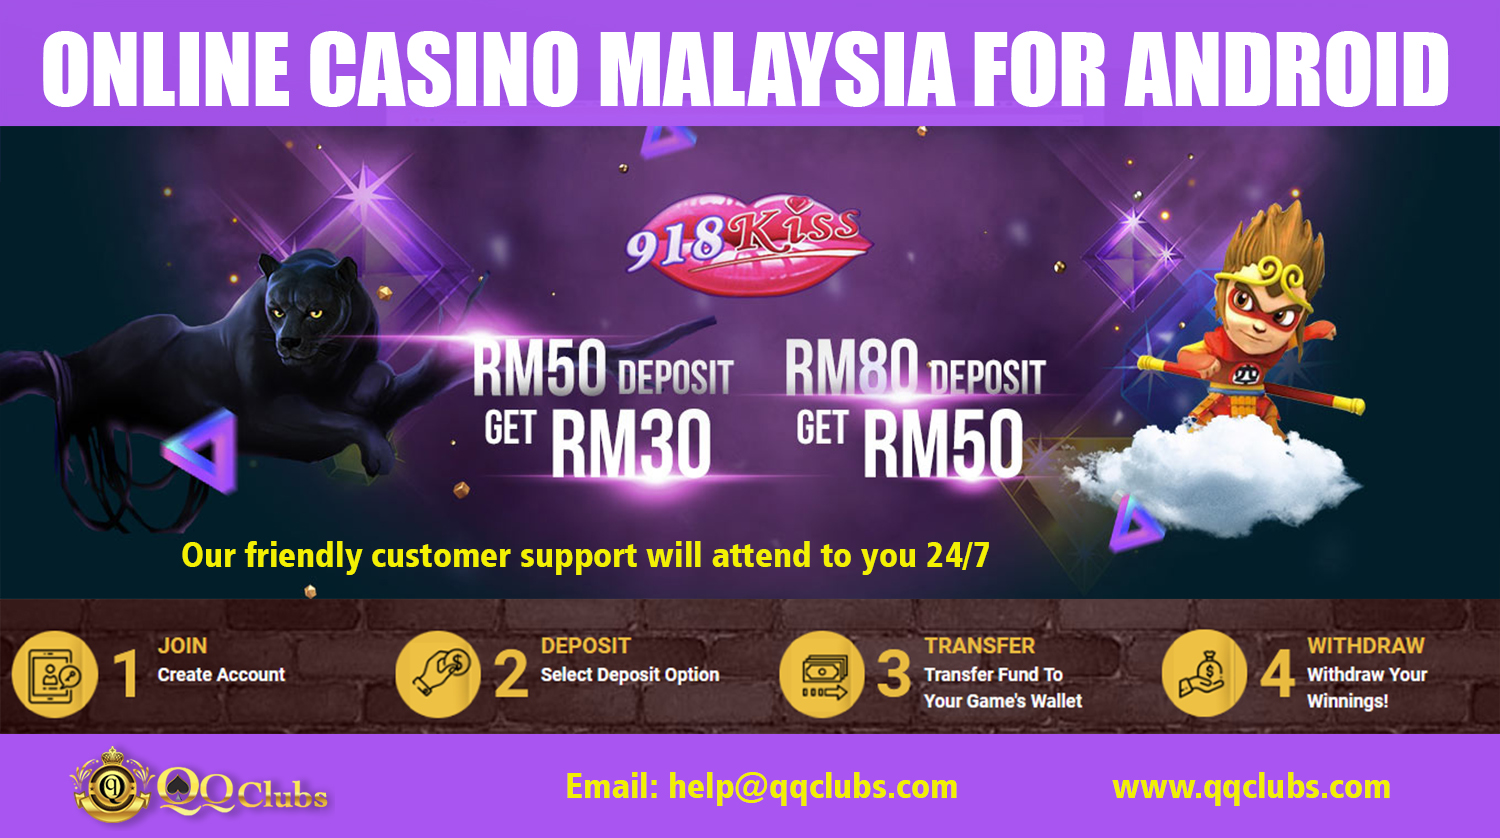 phorum online casino malaysia 2019 for android